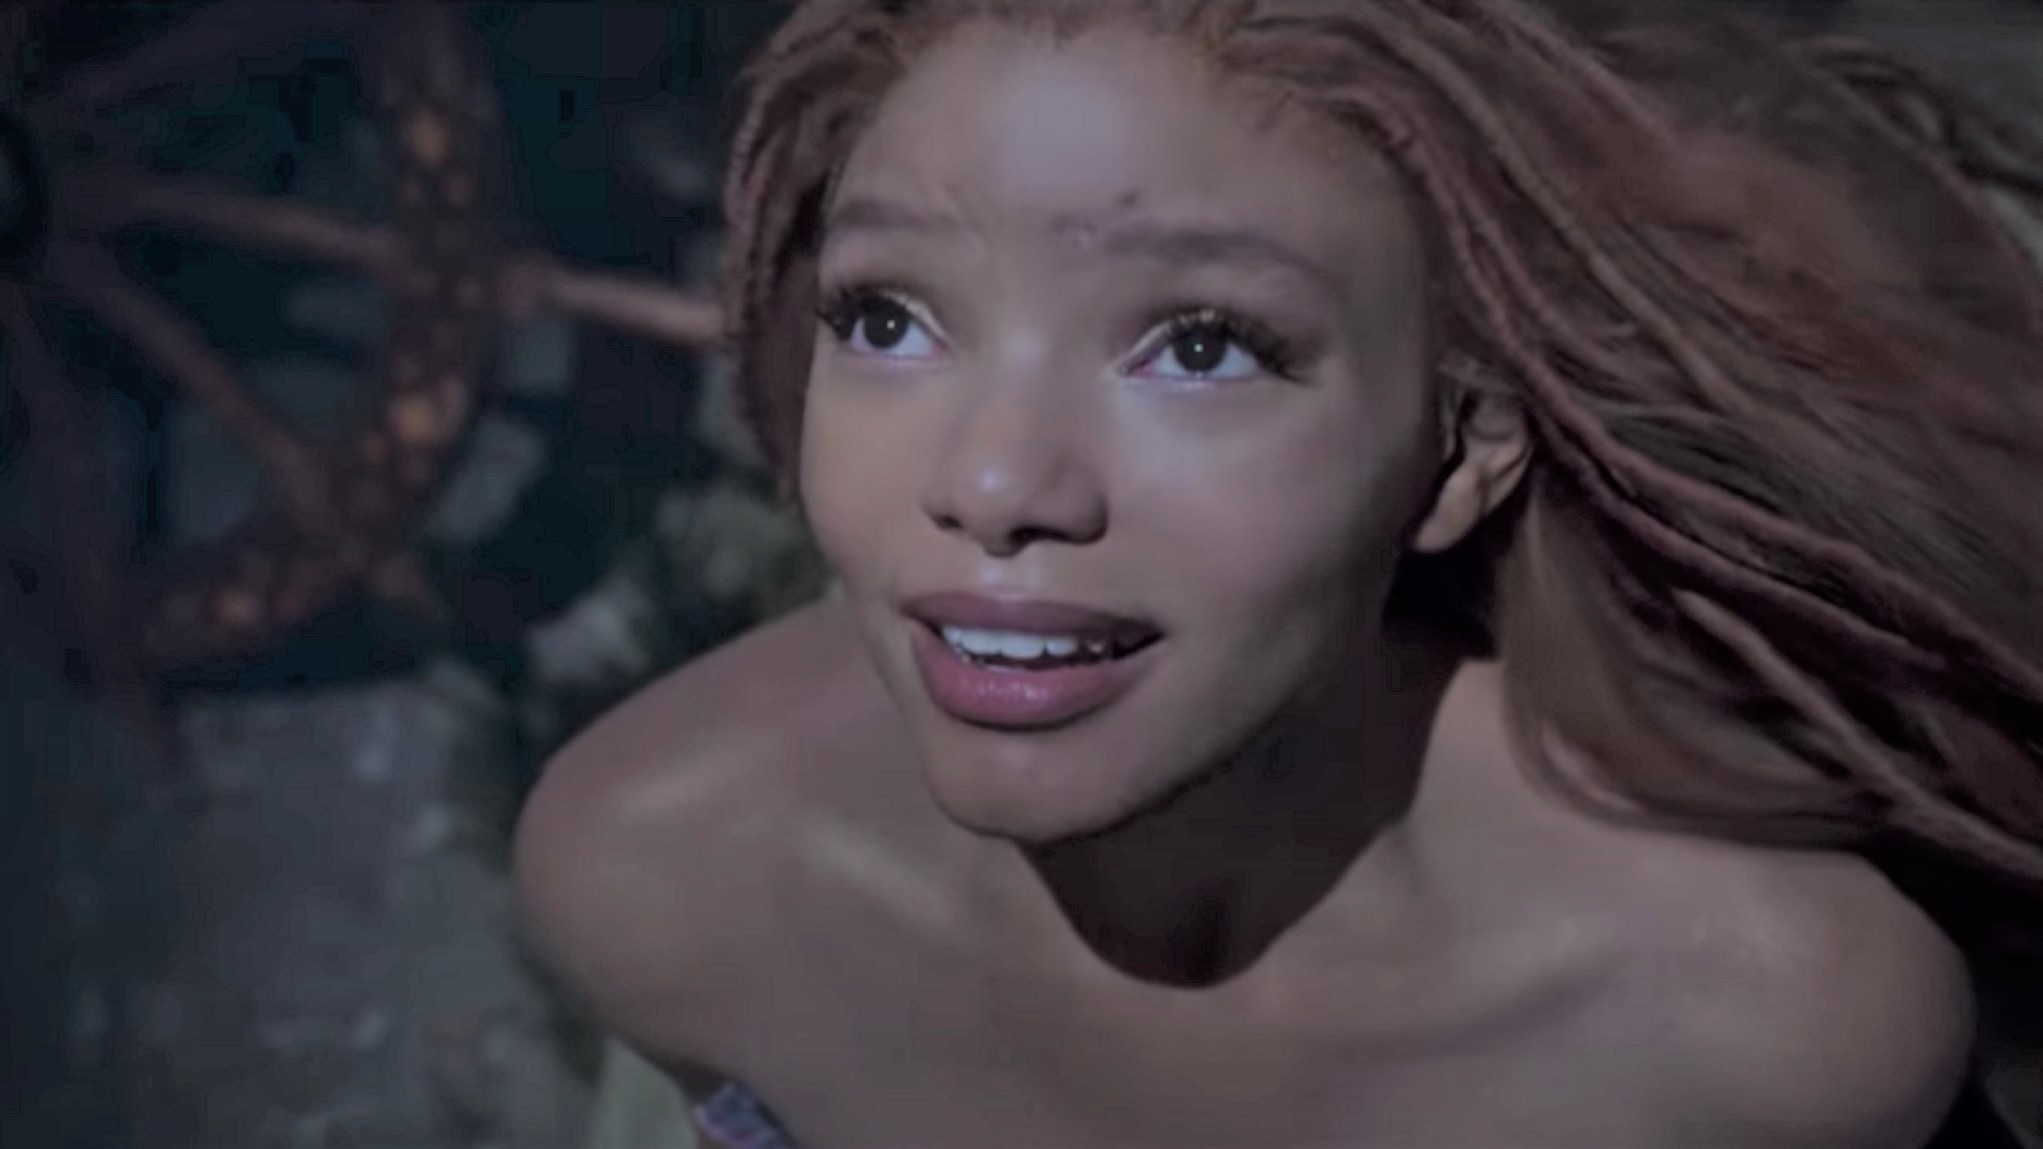 First Look: The Little Mermaid Teaser With Halle Bailey Is Breathtakingly Beautiful & Will Move You To Tears